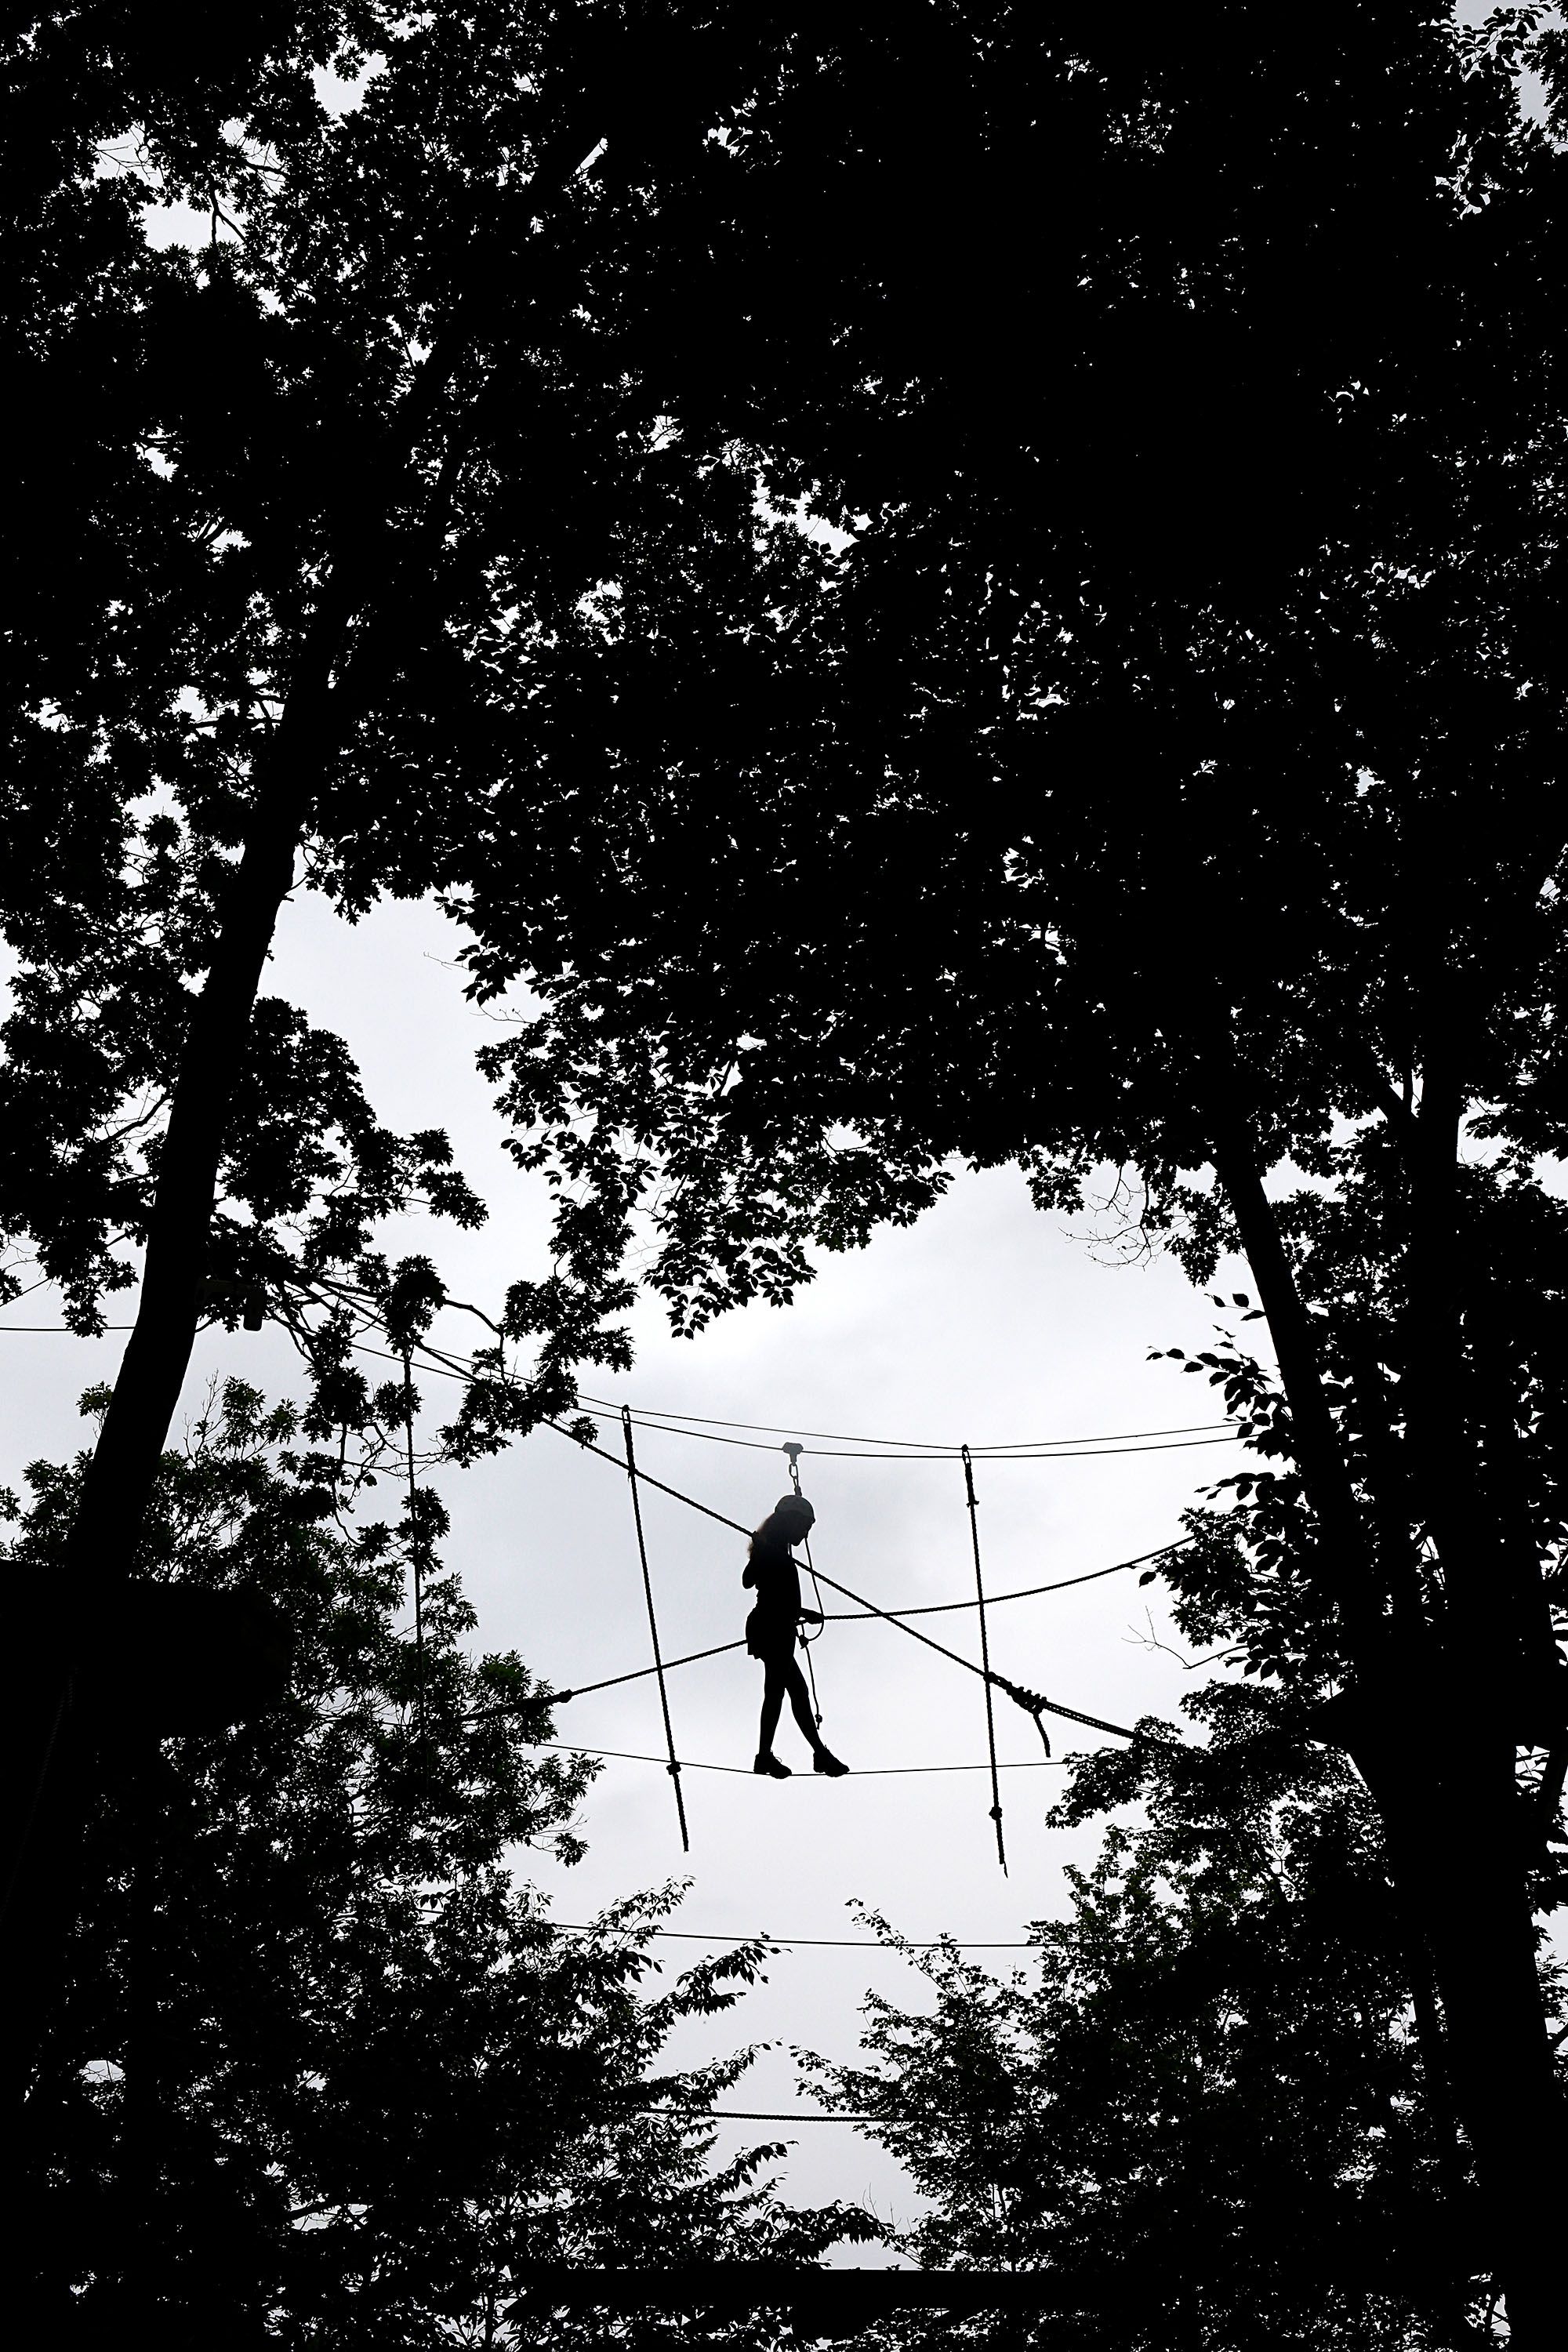 While buckled in with a harness, Molly Flaherty, 15, of Foxborough, Mass., watches her step as she negotiates a tightrope at  the Aerial Challenge Course at Mount Sunapee Resort's Adventure Park in Sunapee, N.H., on July 14, 2018. The resort has added several recreational activities, including the course, to become a year-round destination. (Valley News - Geoff Hansen) Copyright Valley News. May not be reprinted or used online without permission. Send requests to permission@vnews.com.